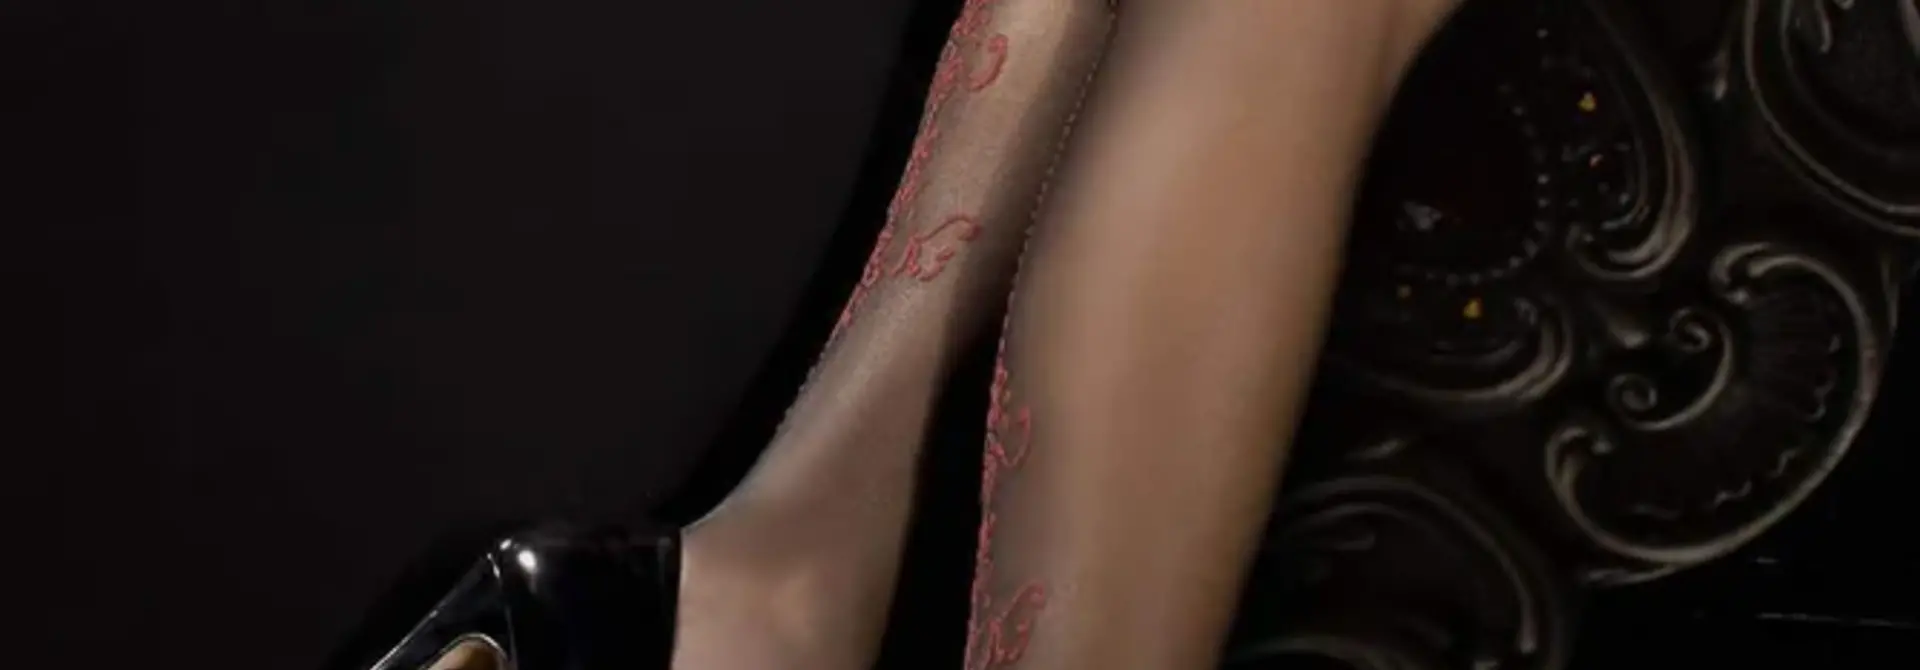 Studio Collants Sheer Black and Red Hold-up Stockings